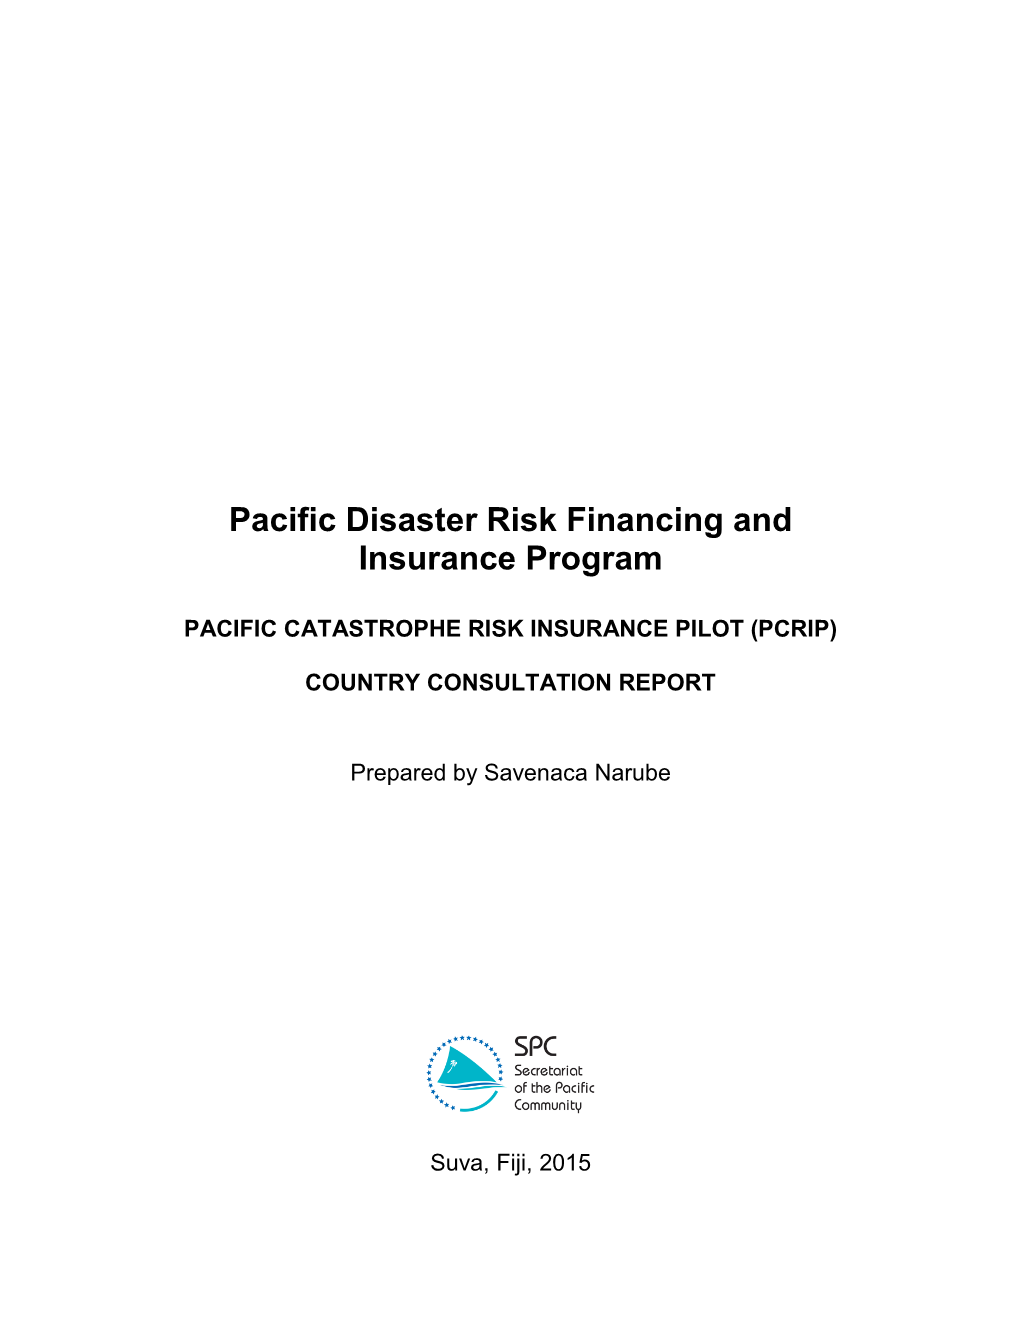 Pacific Disaster Risk Financing and Insurance Program